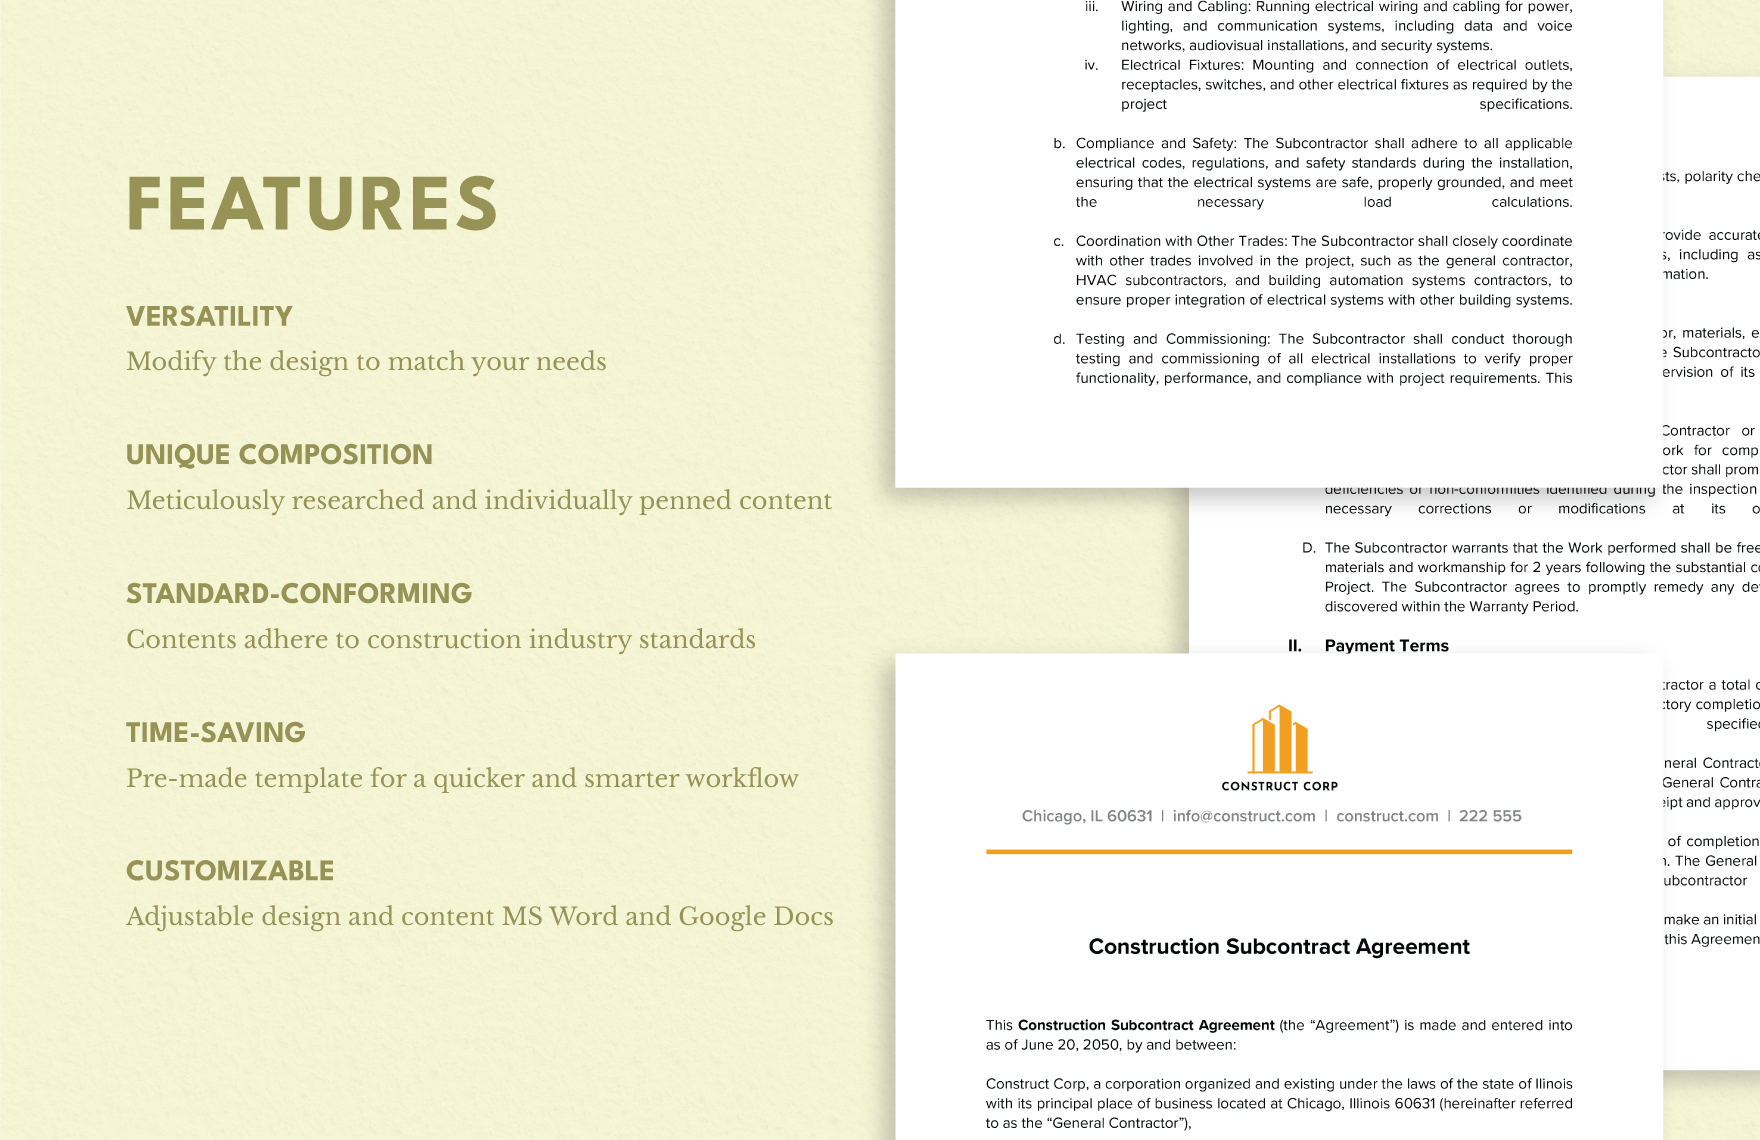 Construction Subcontract Agreement Template